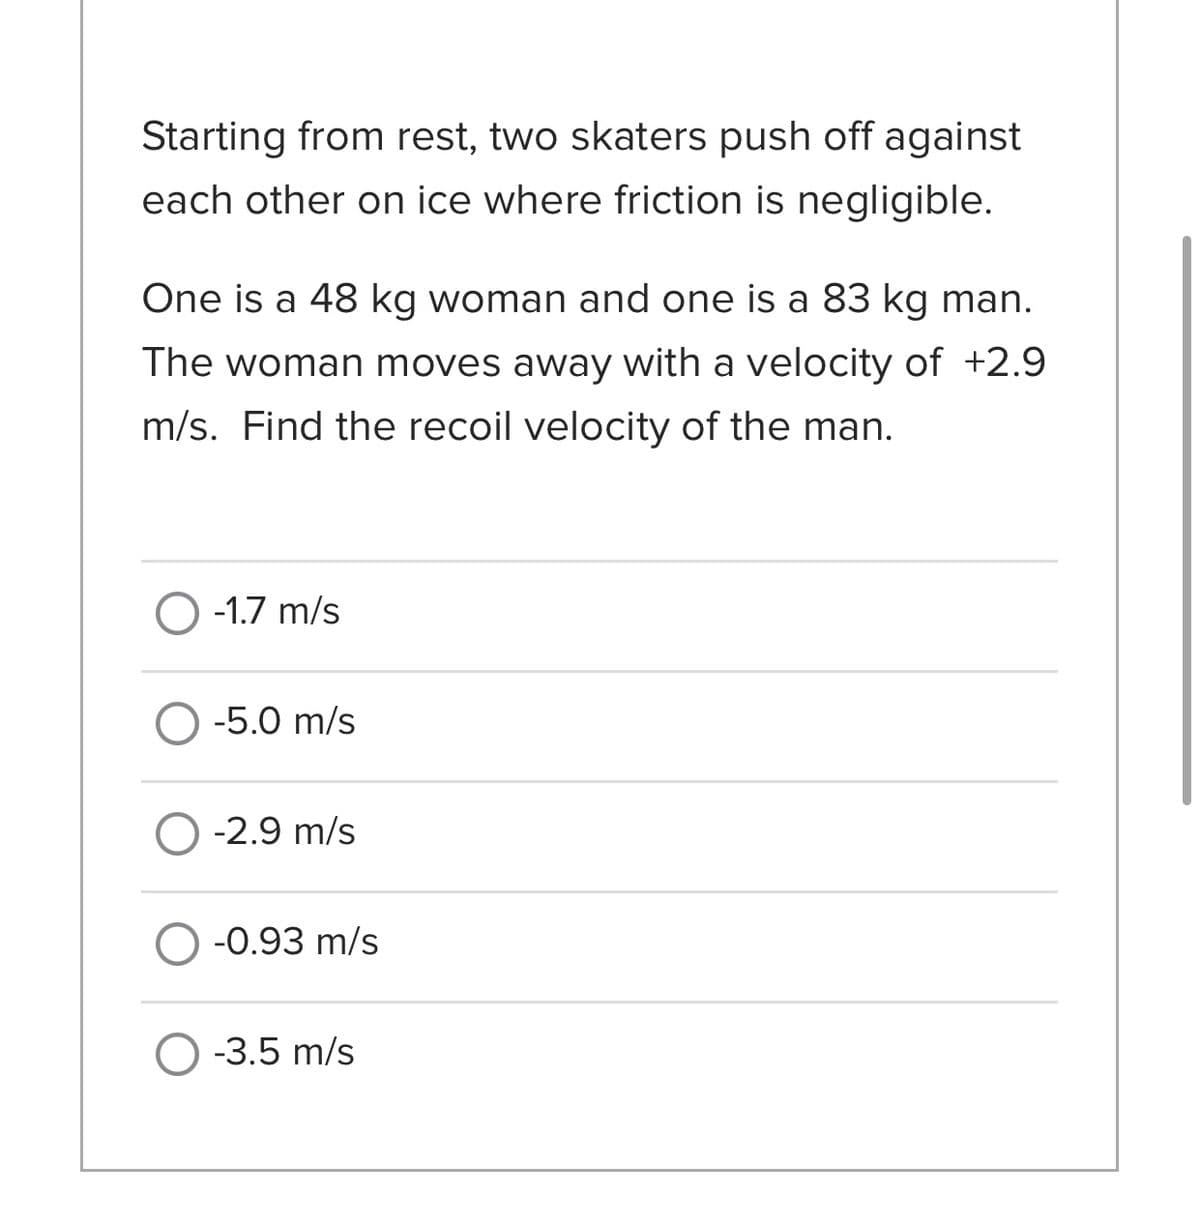 Starting from rest, two skaters push off against
each other on ice where friction is negligible.
One is a 48 kg woman and one is a 83 kg man.
The woman moves away with a velocity of +2.9
m/s. Find the recoil velocity of the man.
O -1.7 m/s
O -5.0 m/s
O -2.9 m/s
-0.93 m/s
O -3.5 m/s
